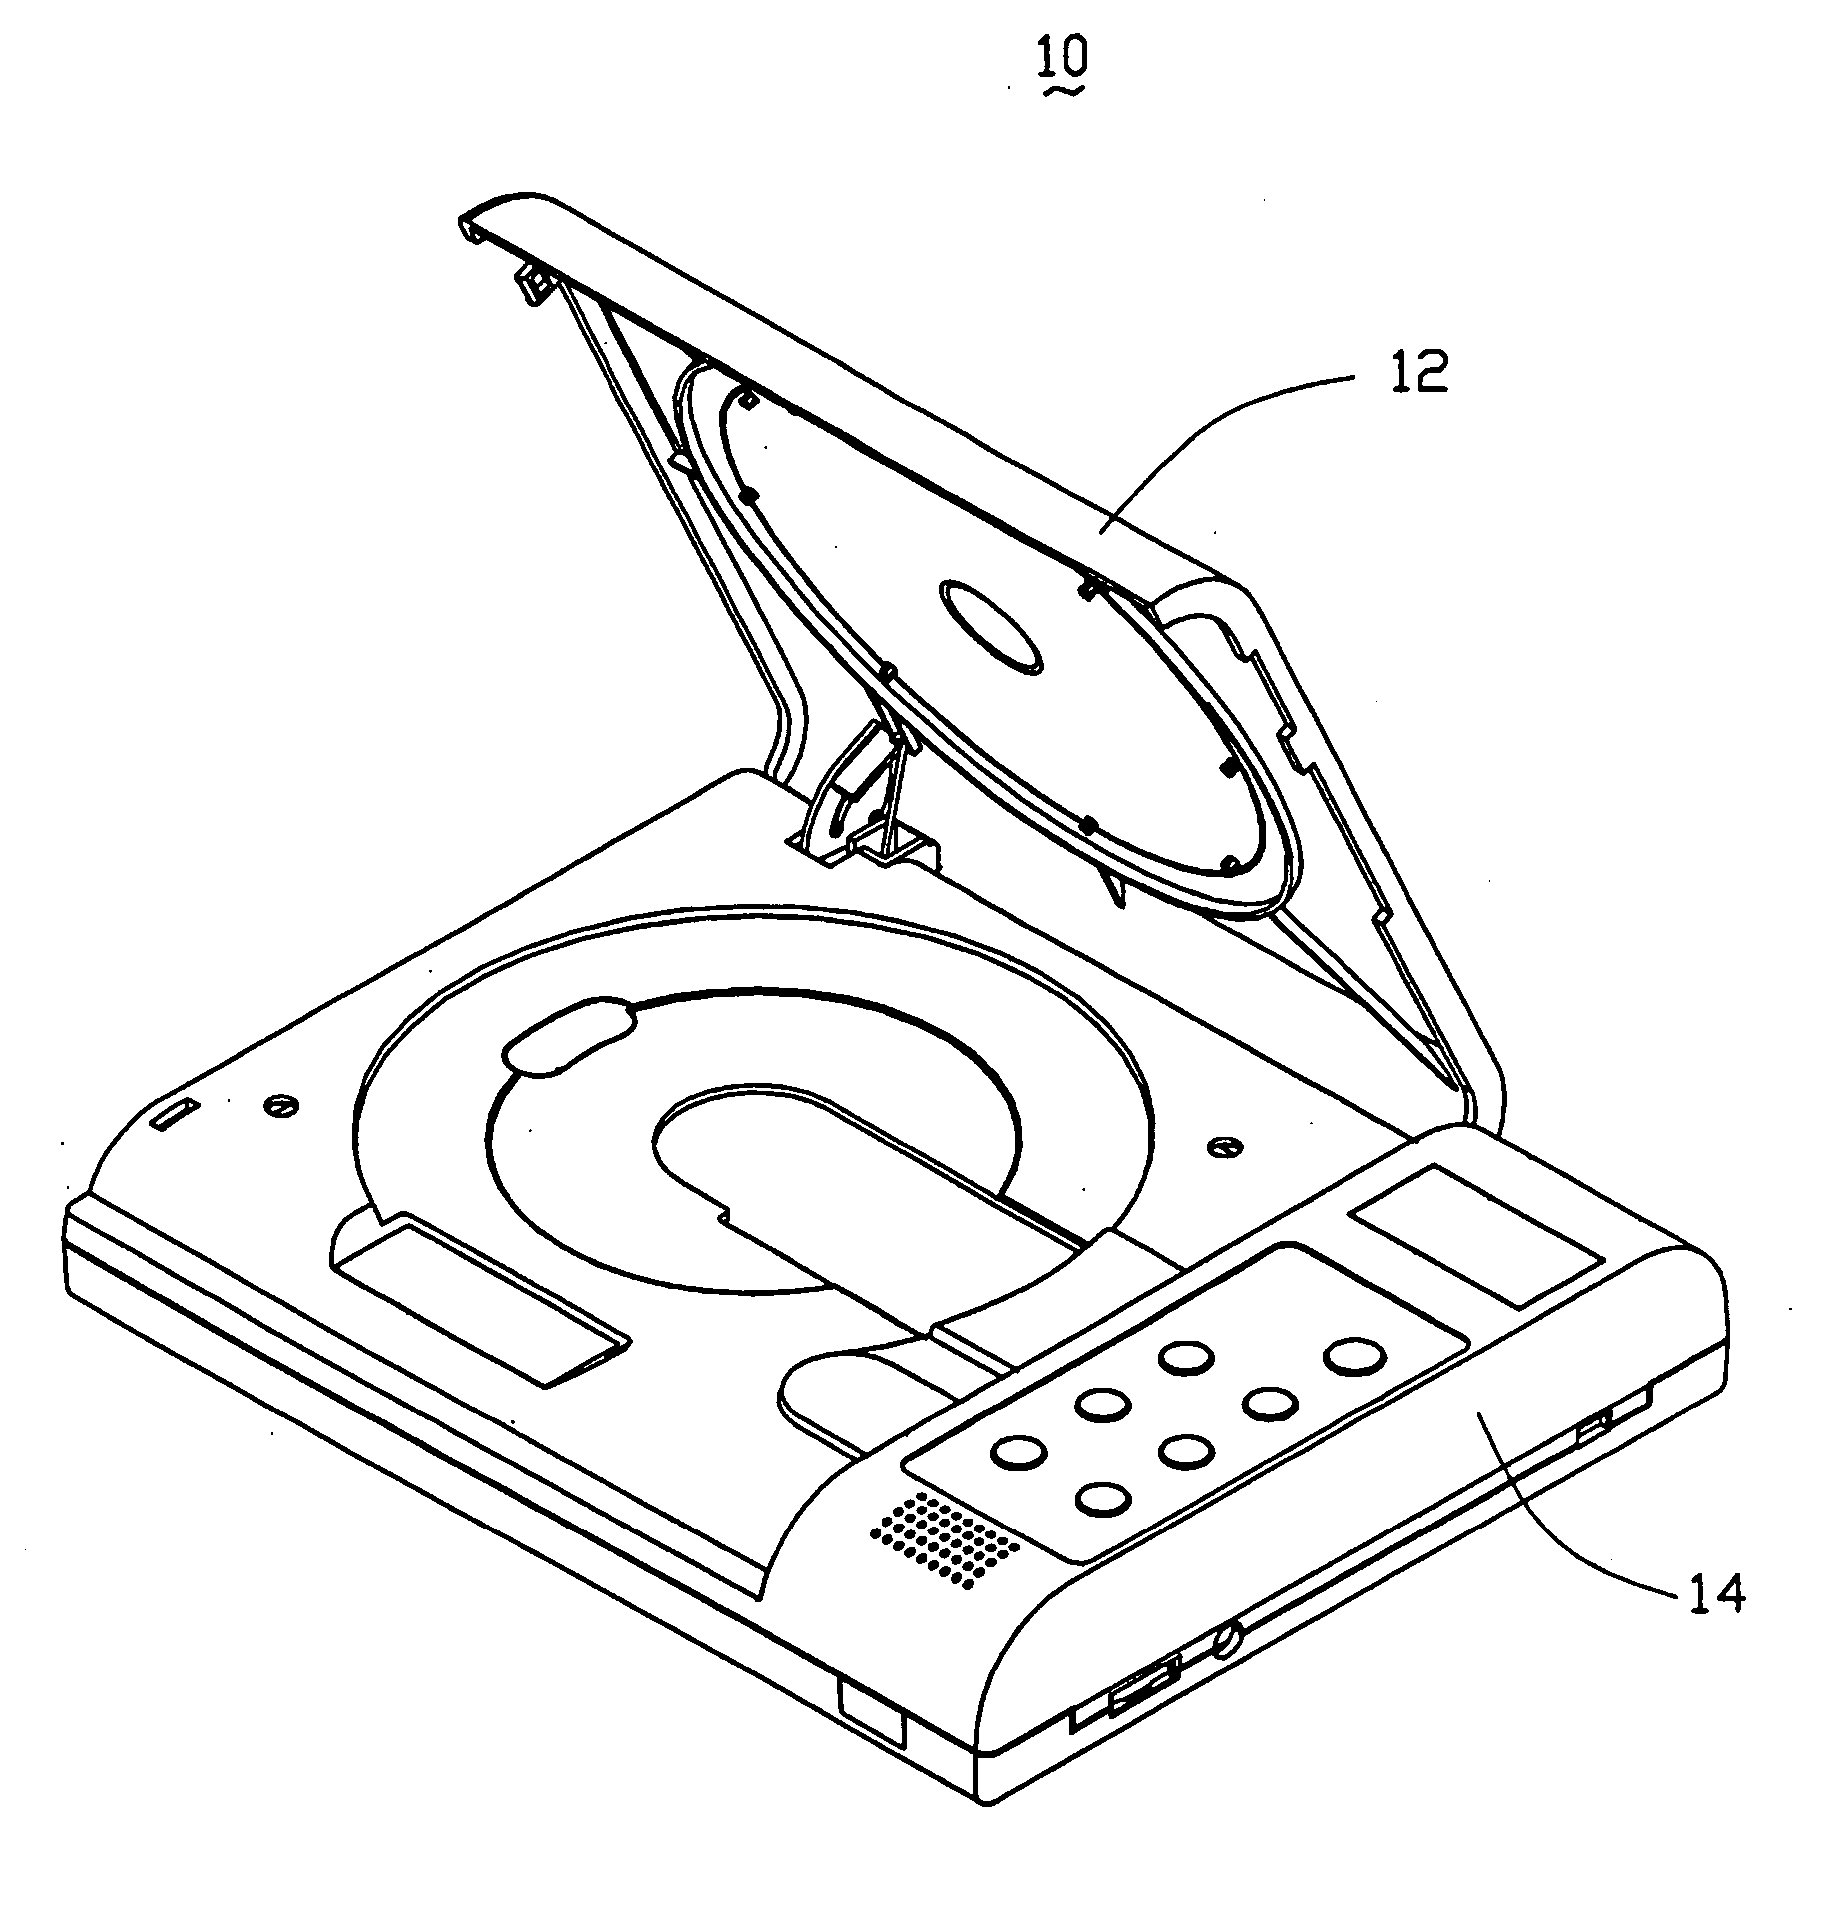 Casing for optical disk player